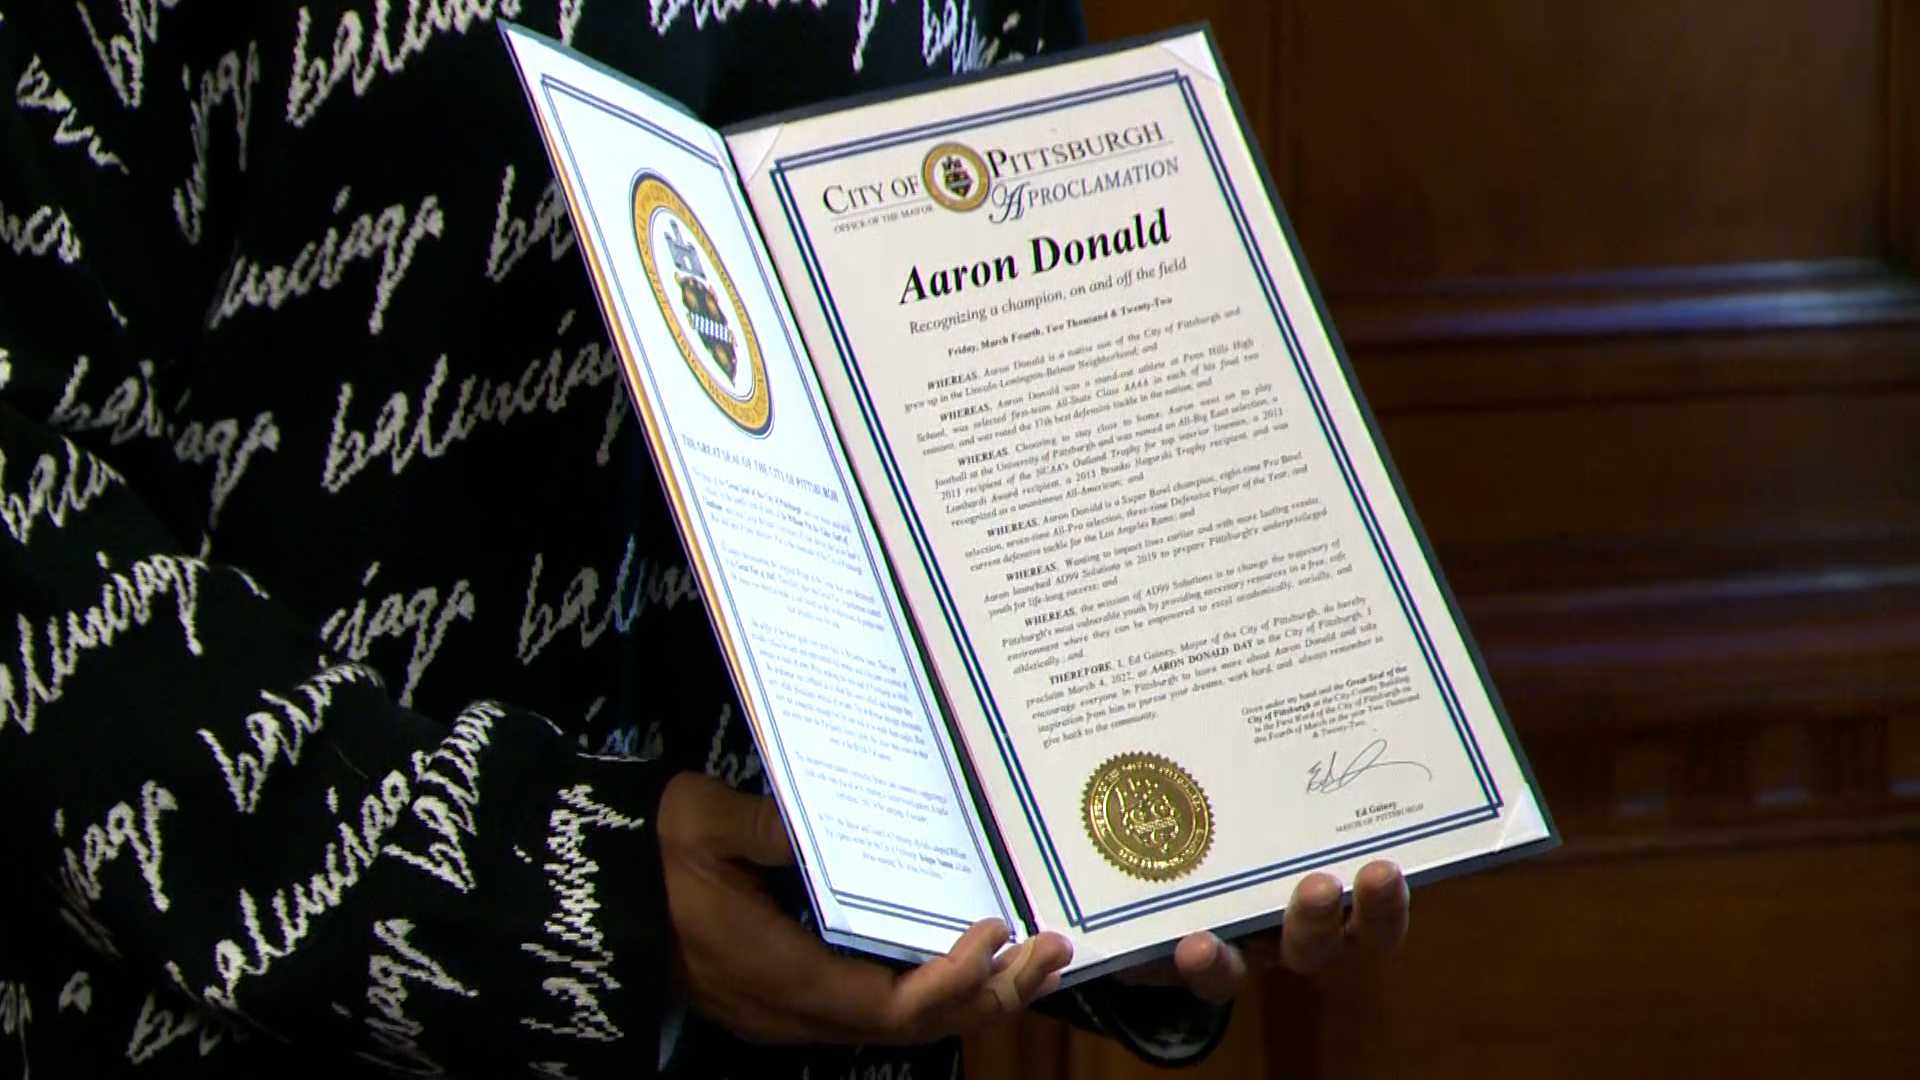 Aaron Donald Day: Pittsburgh honors hometown football star